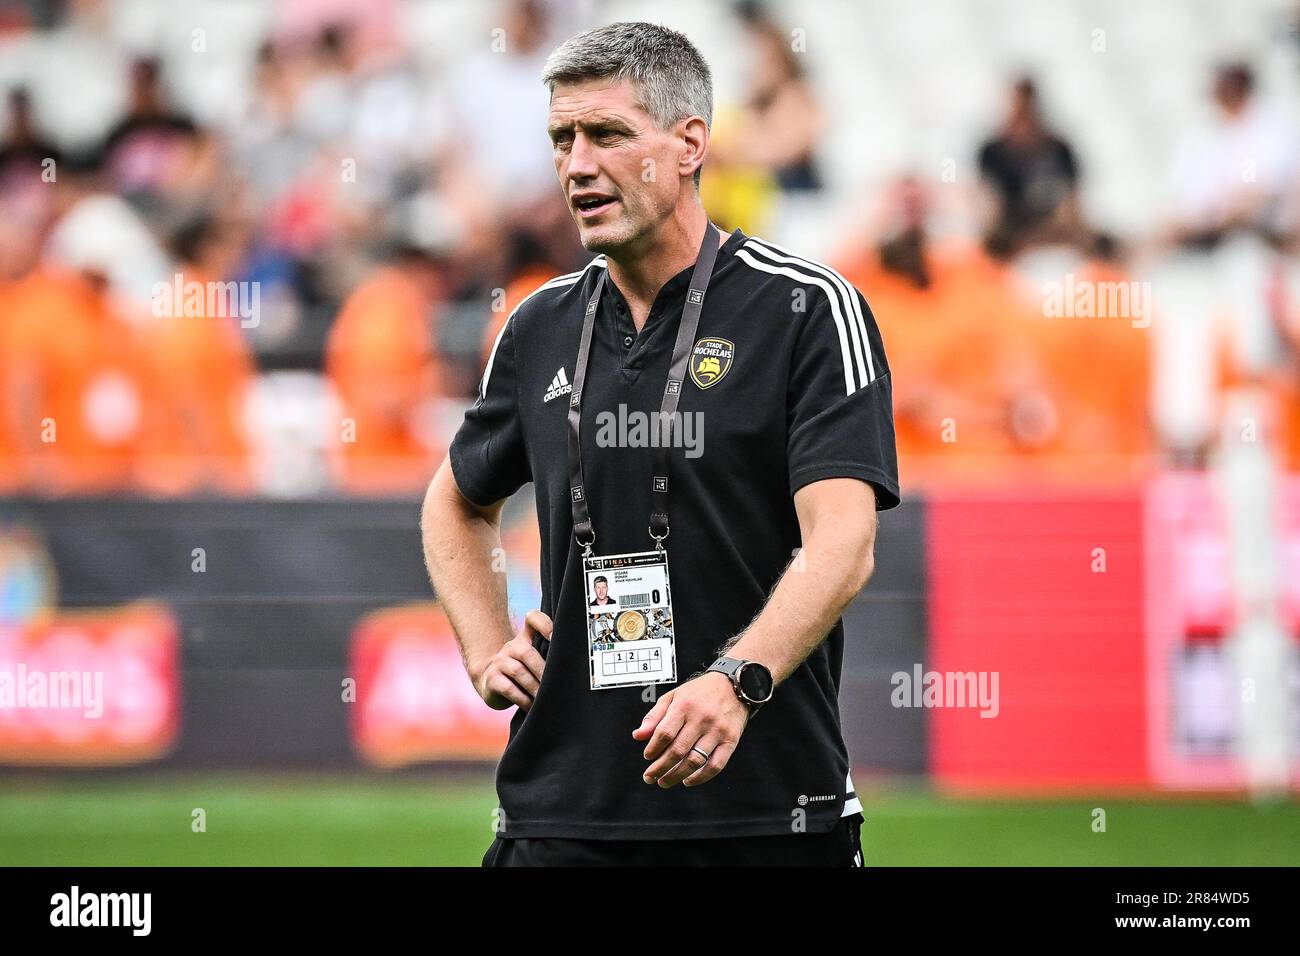 Saint Denis, France. 17th June, 2023. Ronan O'GARA of La Rochelle during  the French championship Top 14 rugby union Final match between Stade  Toulousain (Toulouse) and Stade Rochelais (La Rochelle) on June